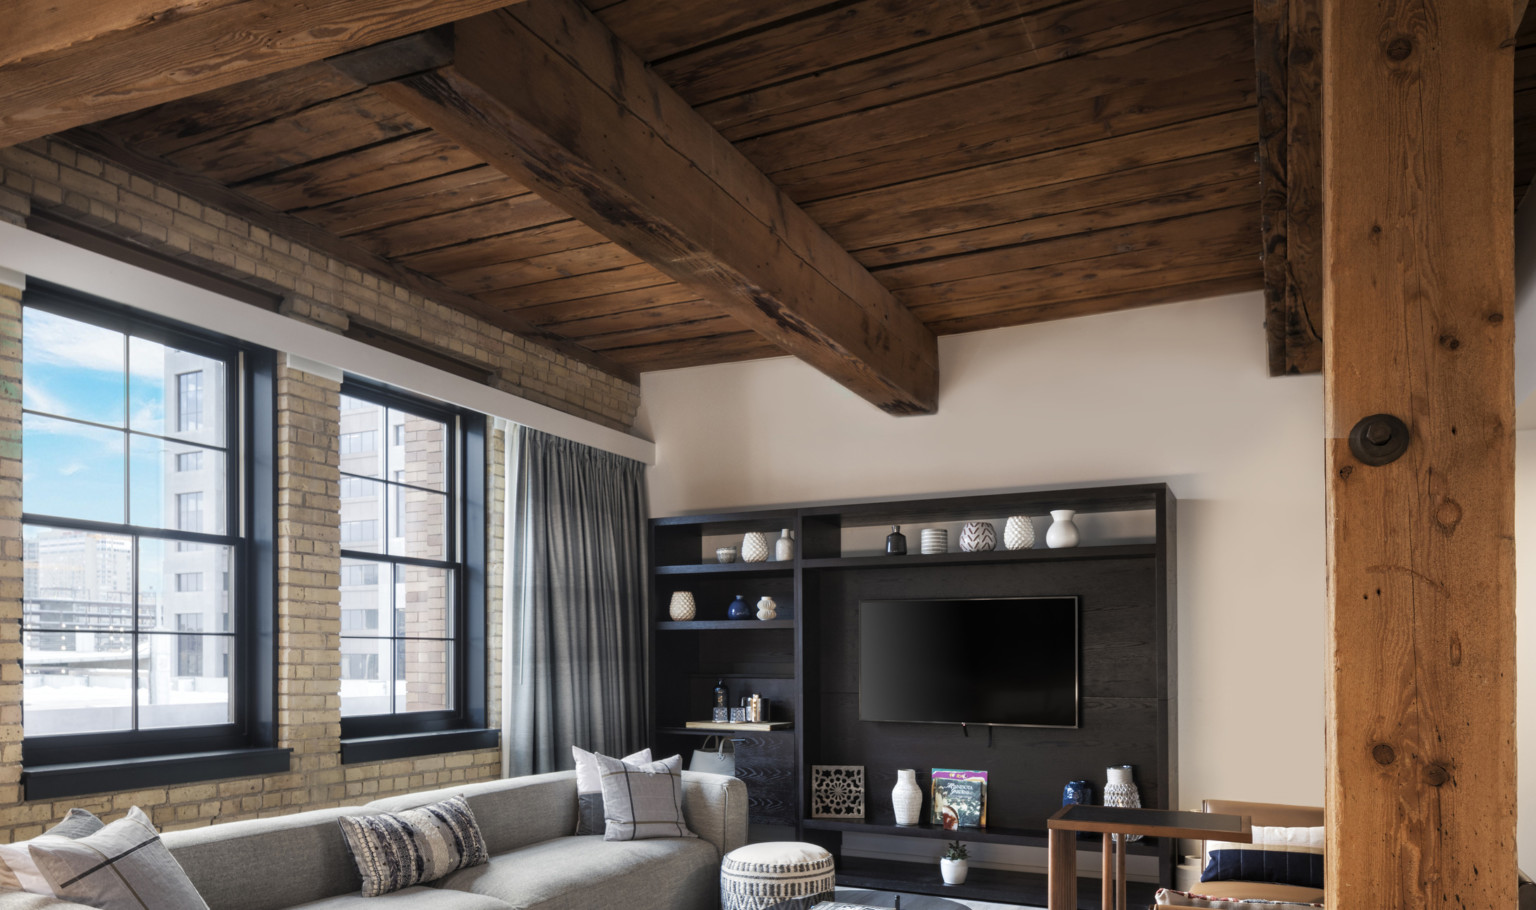 Heavy timber ceiling, beams, and columns with a gray sofa and dark wood entertainment center